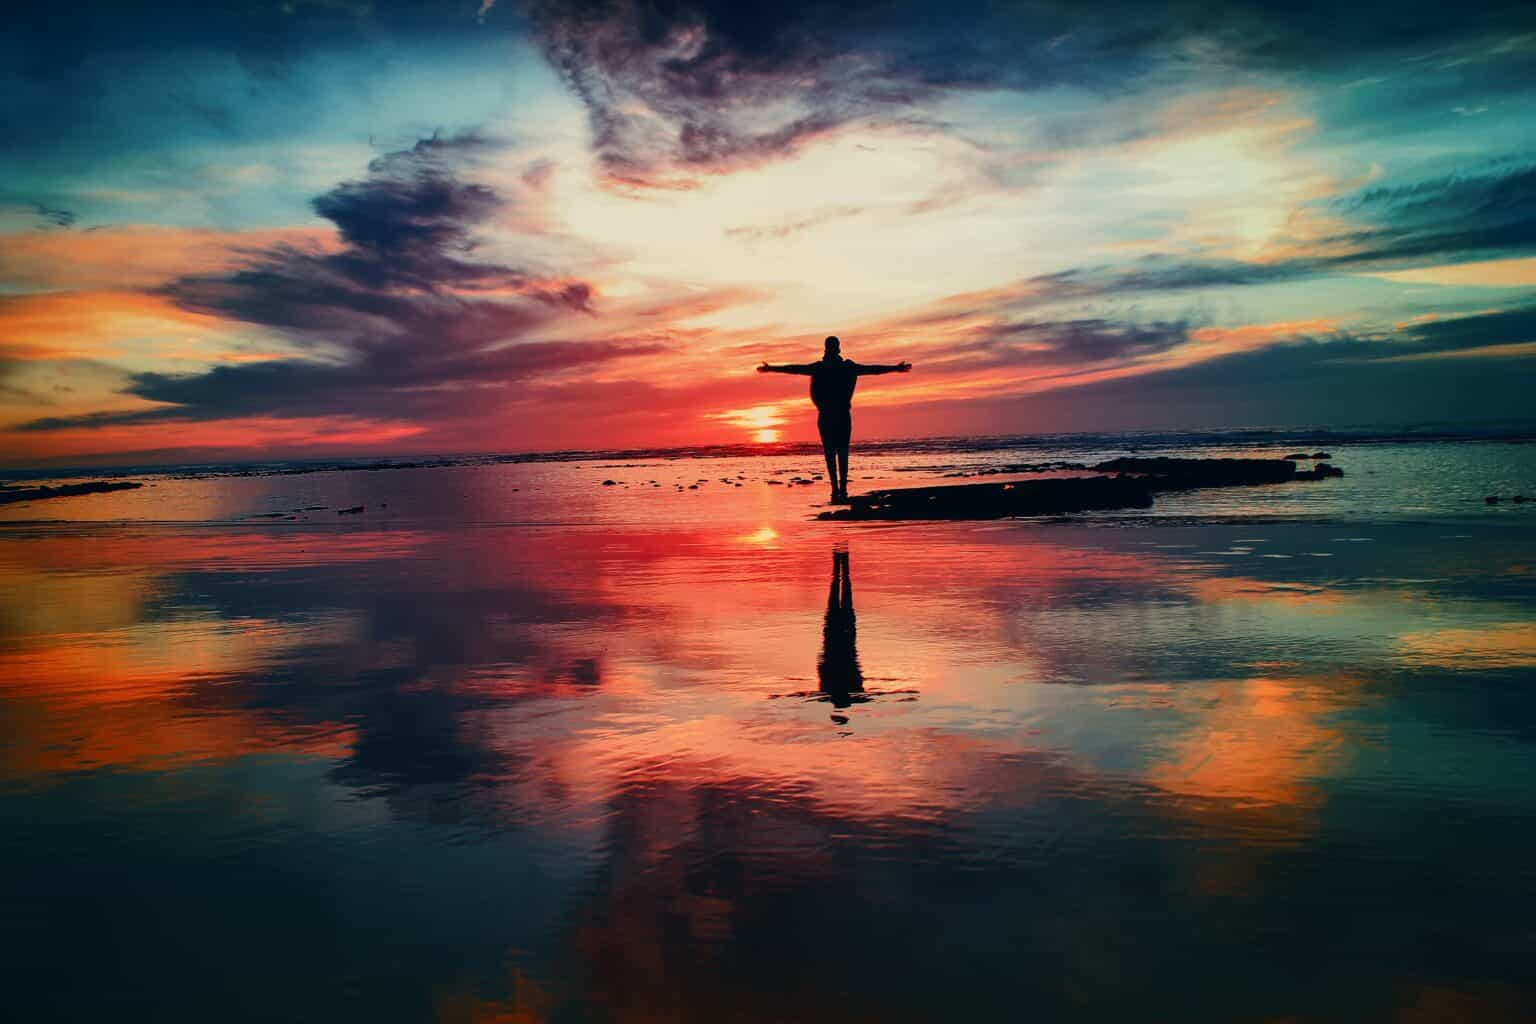 sq man standing on a beach with arms raised